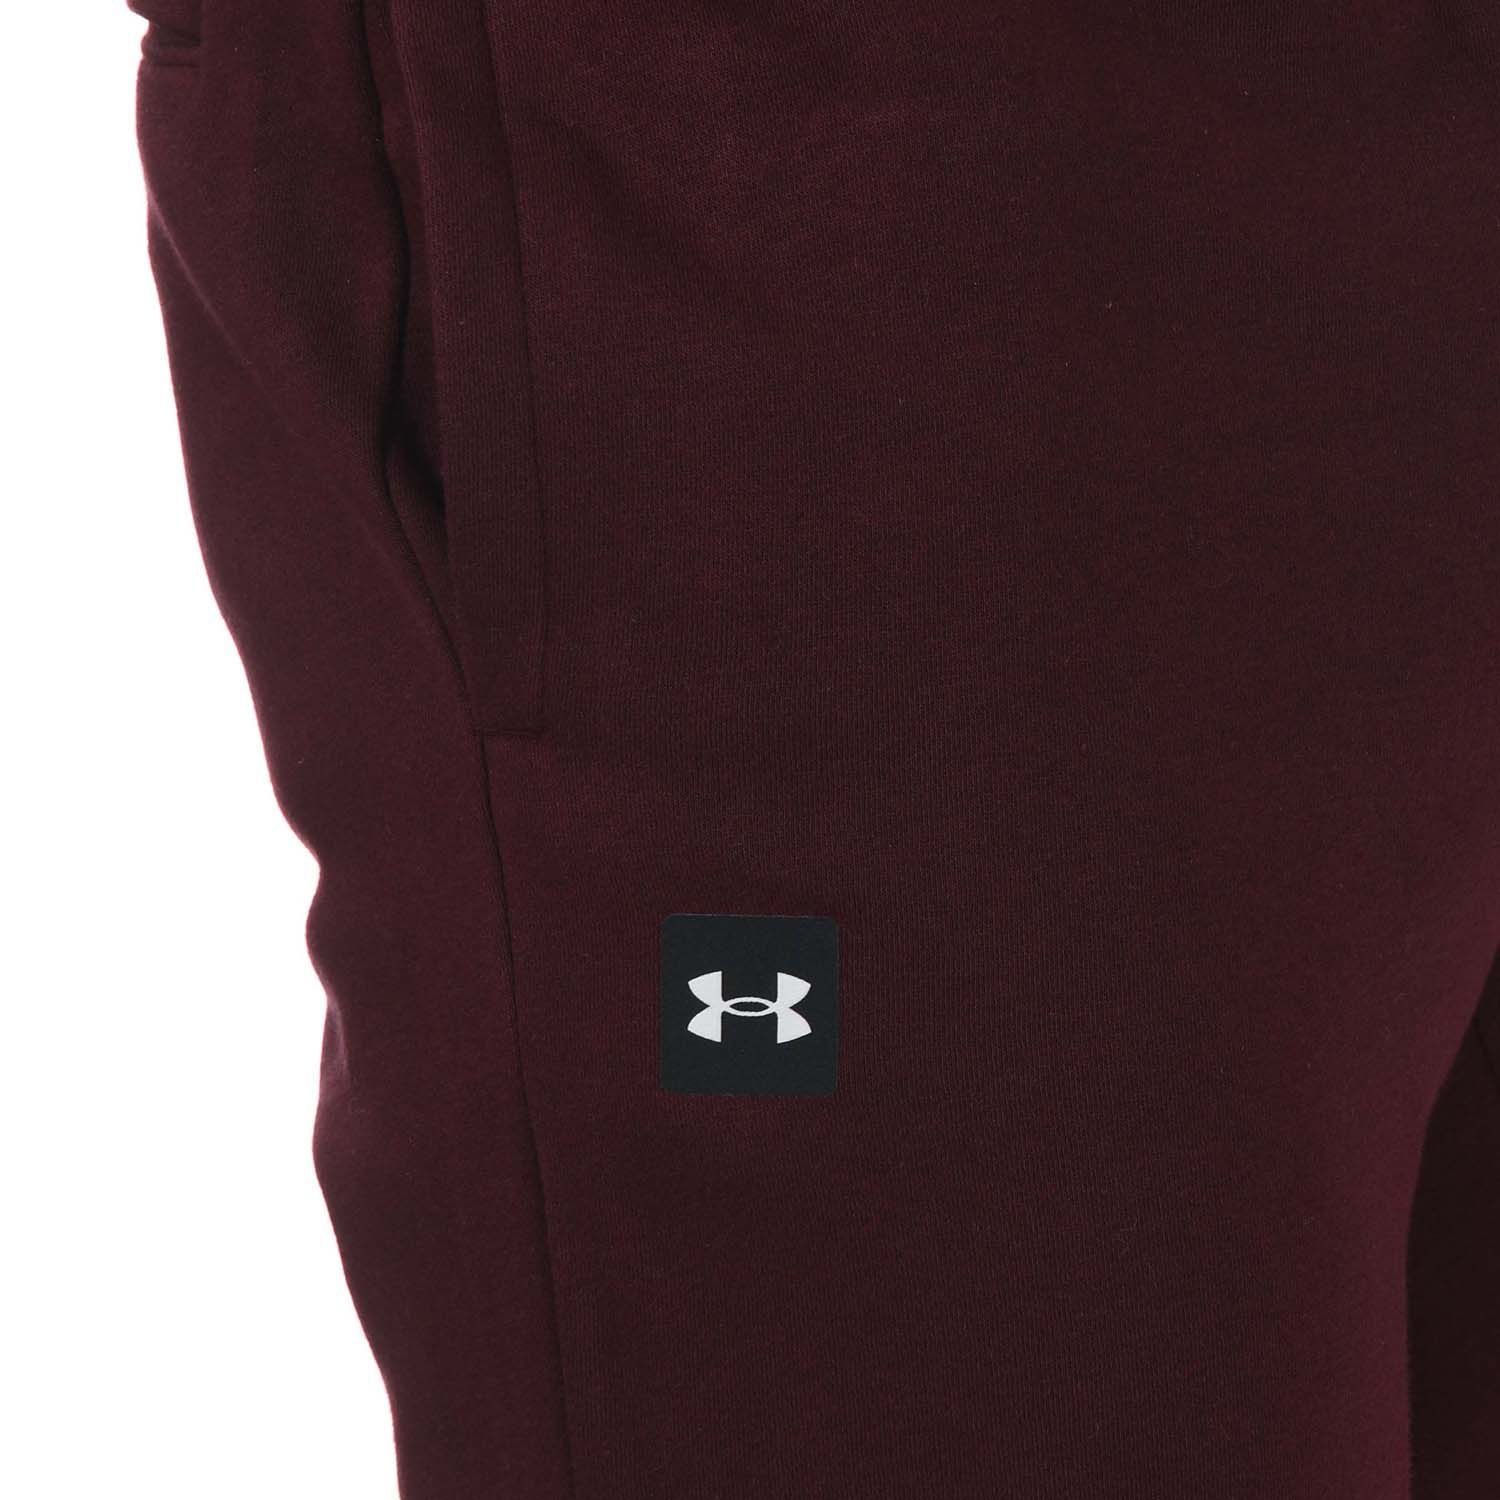 Mens Under Armour Rival Fleece Joggers in burgundy.- Encased elastic waistband with external drawcord.- Open hand pockets & secure.- Snap back pocket.- Ribbed cuffs.- Ultra-soft  mid-weight cotton-blend fleece with brushed interior for extra warmth.- Tapered leg fit- Main Material: 80% Cotton  20% Polyester. Machine washable.- Ref: 1357128600